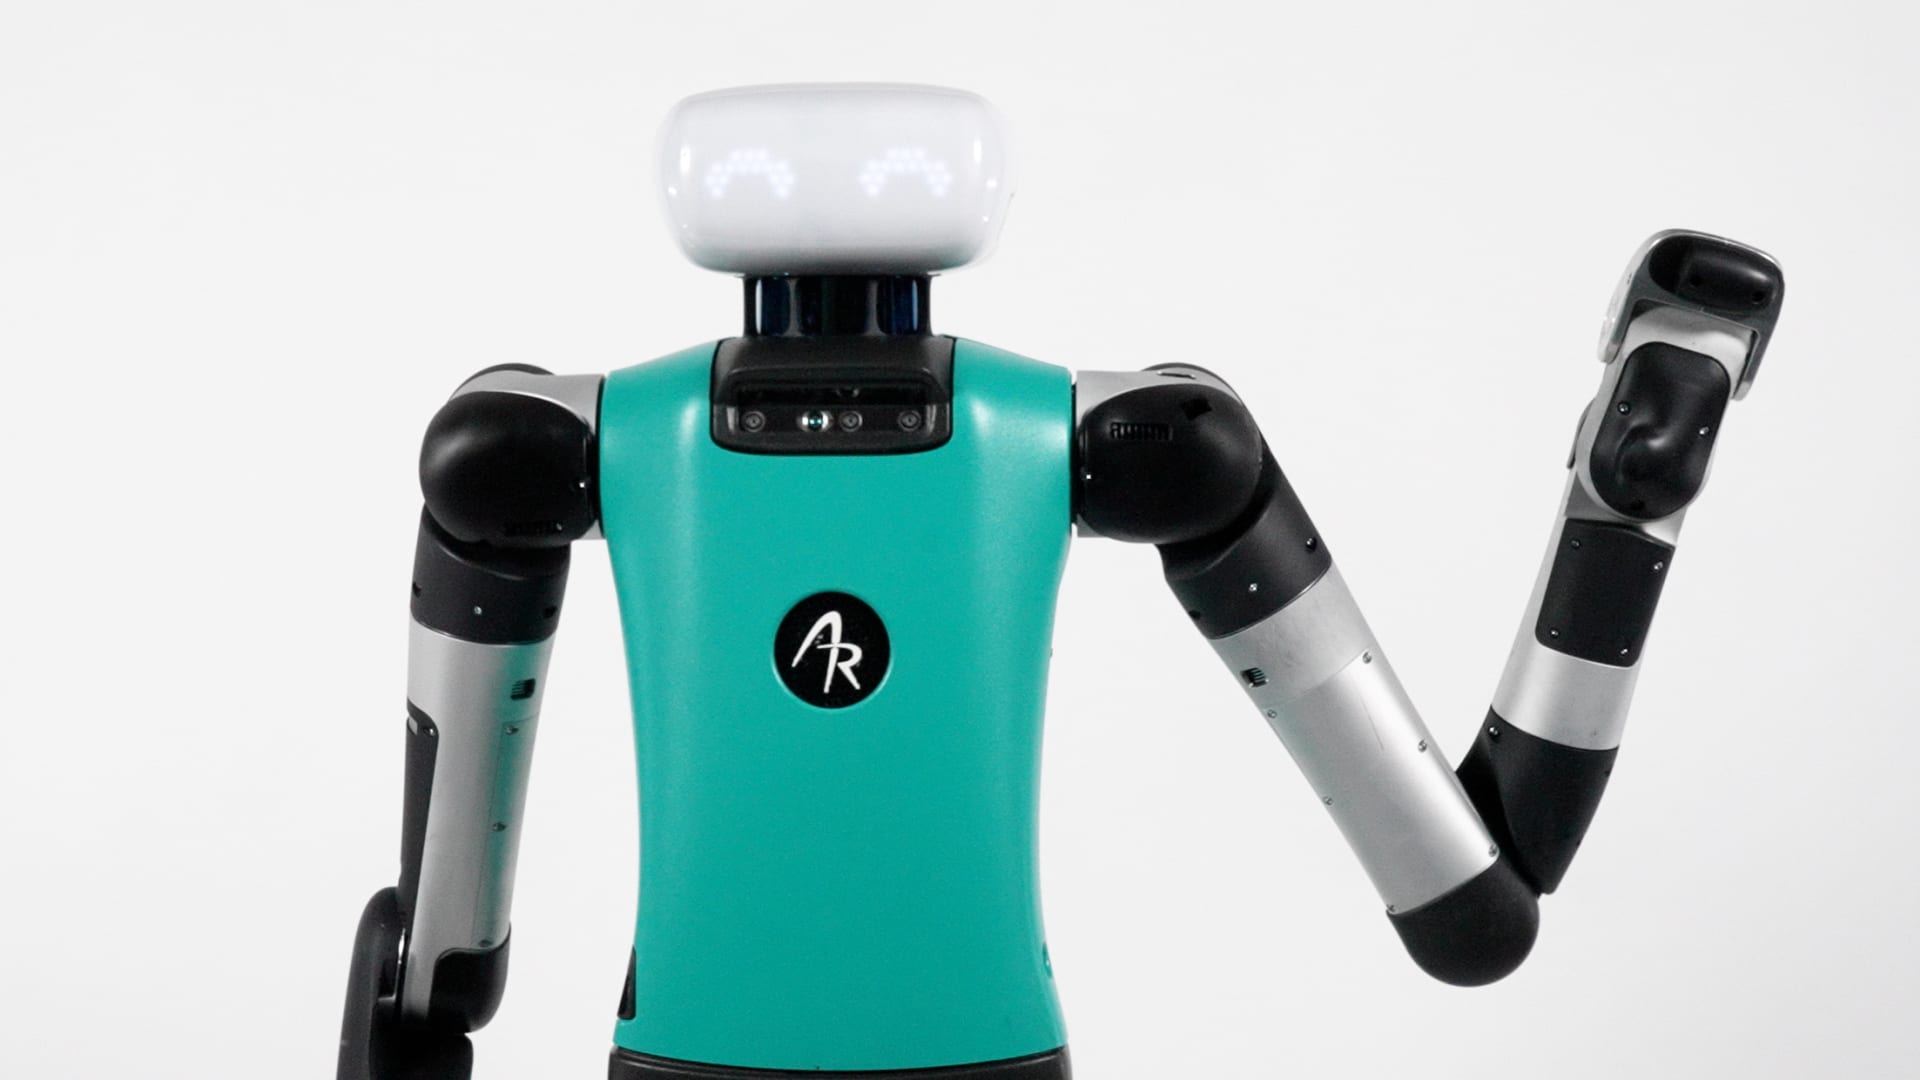 Agility Robotics is opening a humanoid robot factory, beating Tesla to the punch - Image